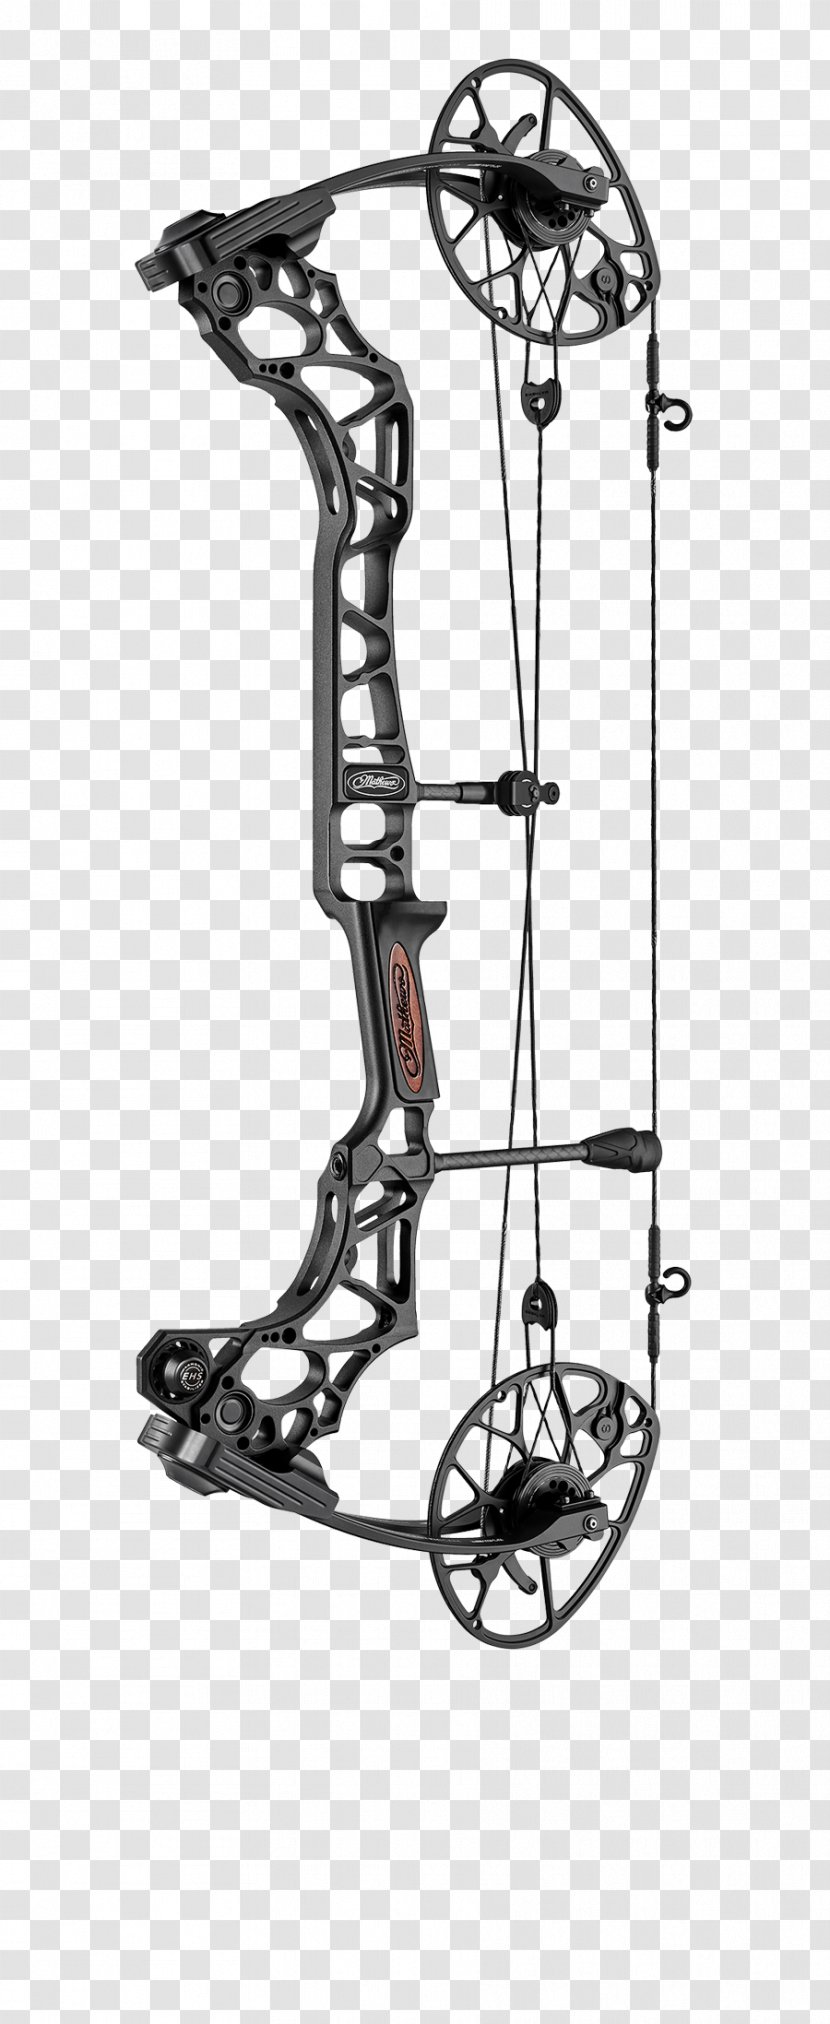 Archery Bowhunting Compound Bows Bow And Arrow - Trade Association Transparent PNG